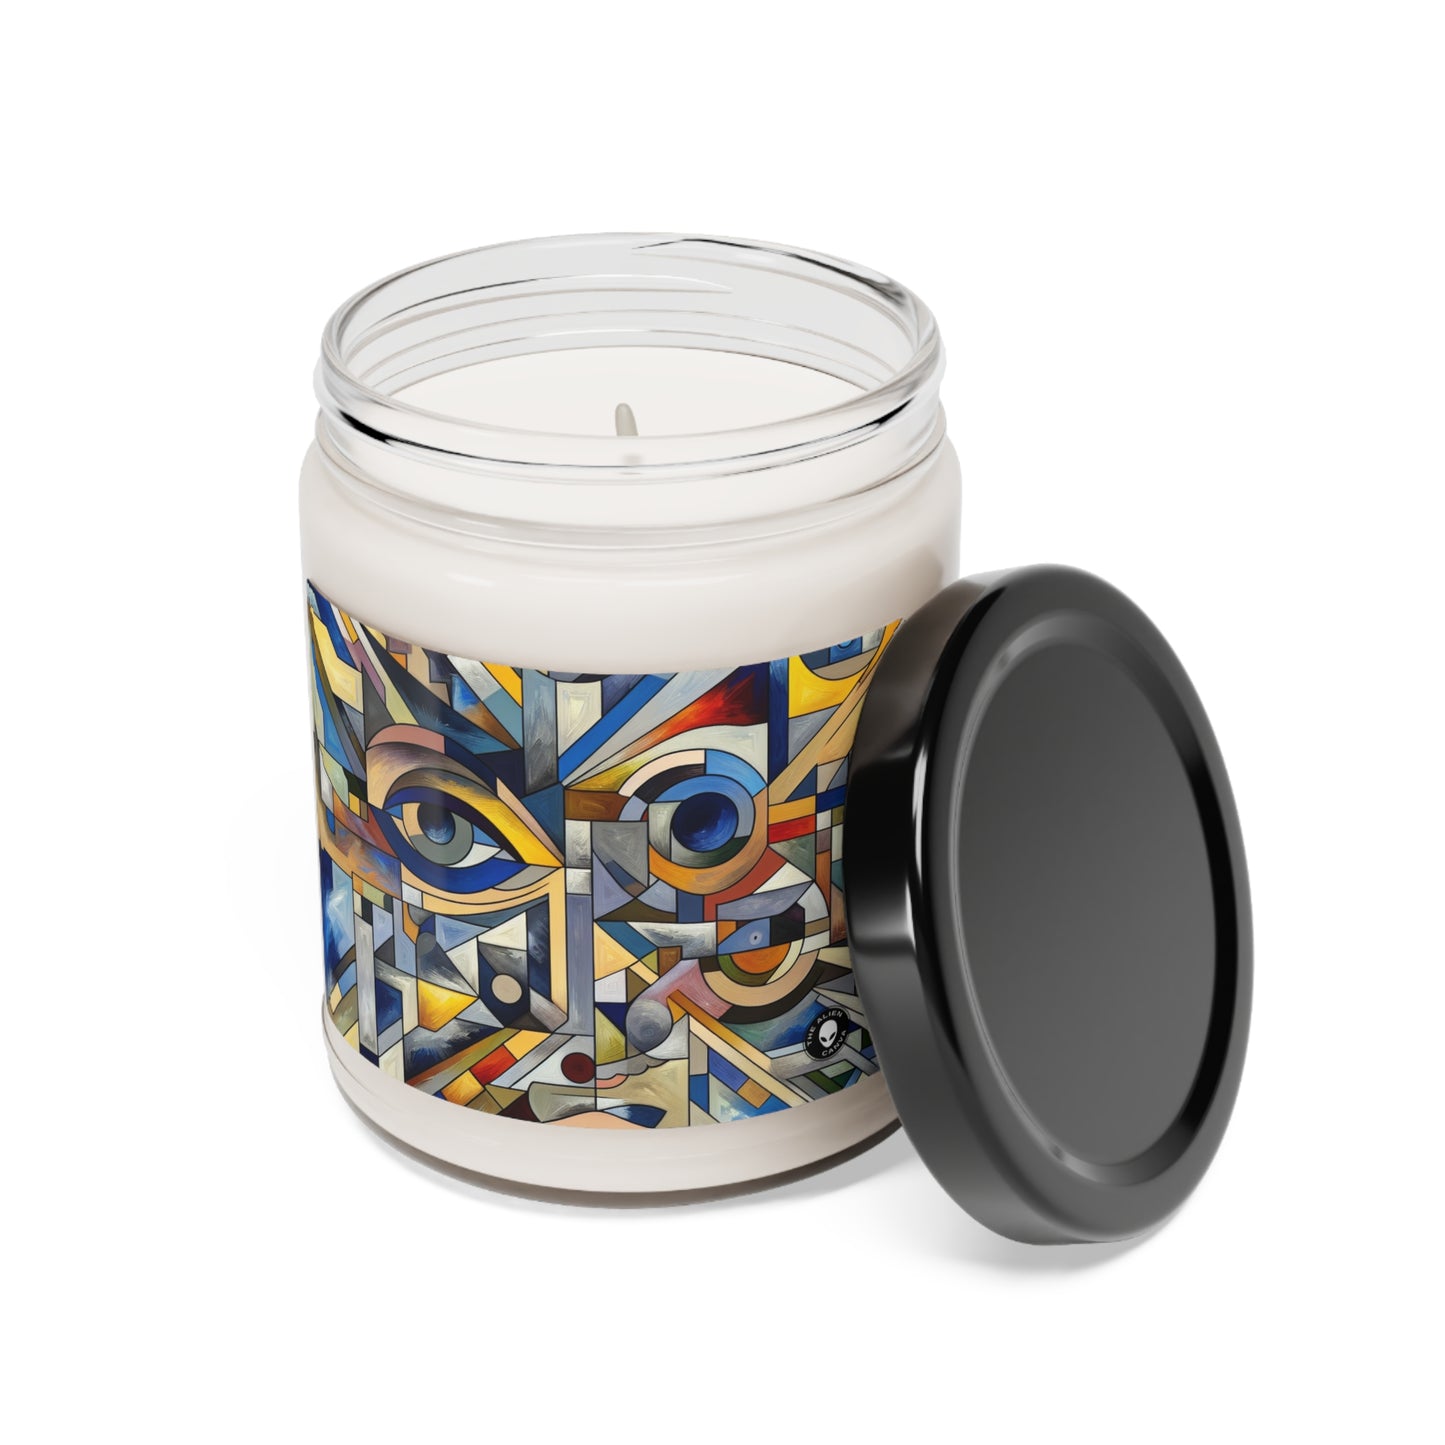 "Urban Fragmentation: An Analytical Cubist Cityscape" - The Alien Scented Soy Candle 9oz Analytical Cubism